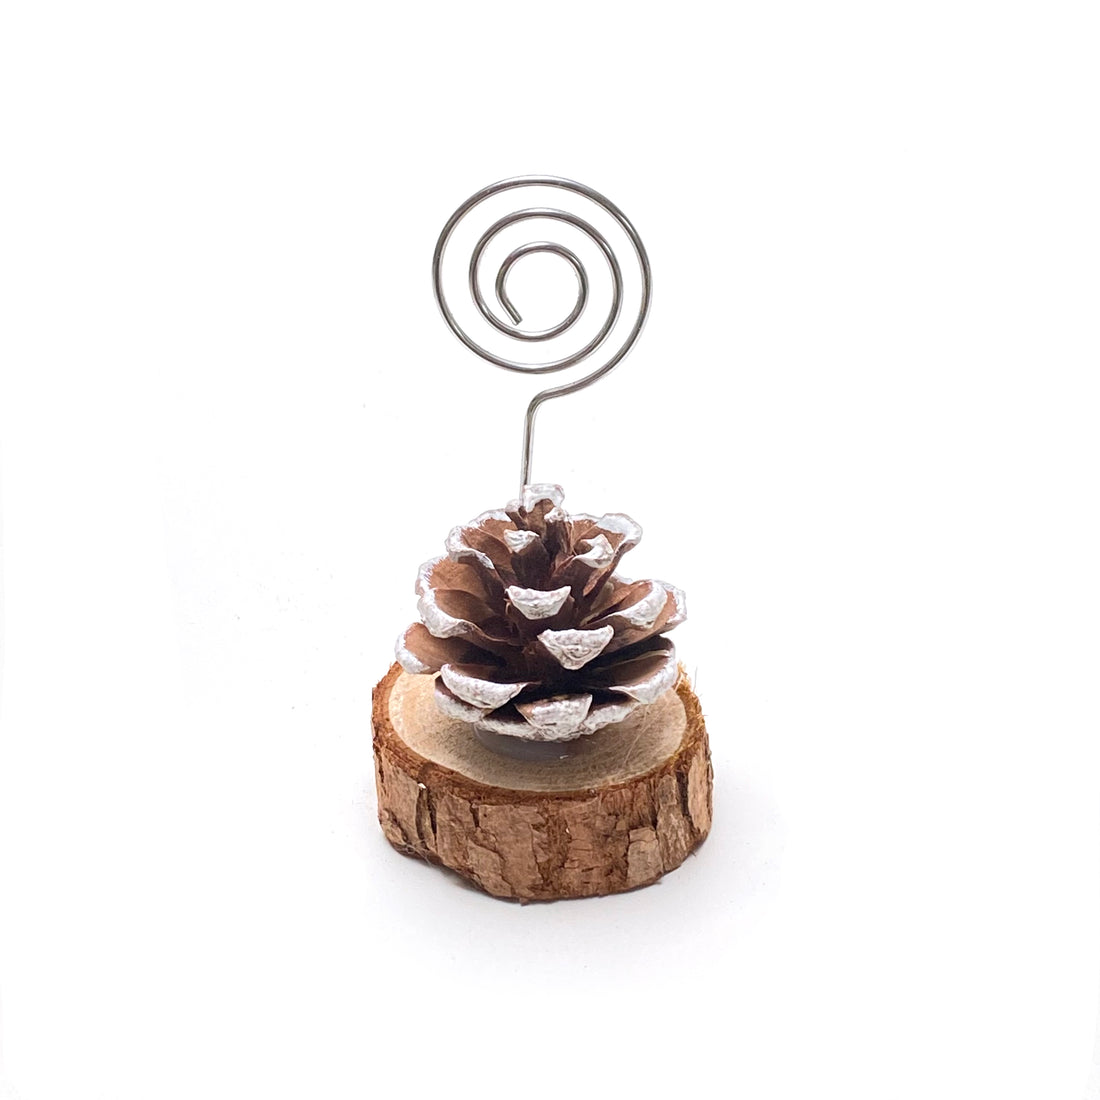 SET 4 PINECONE PLACECARD HOLDERS